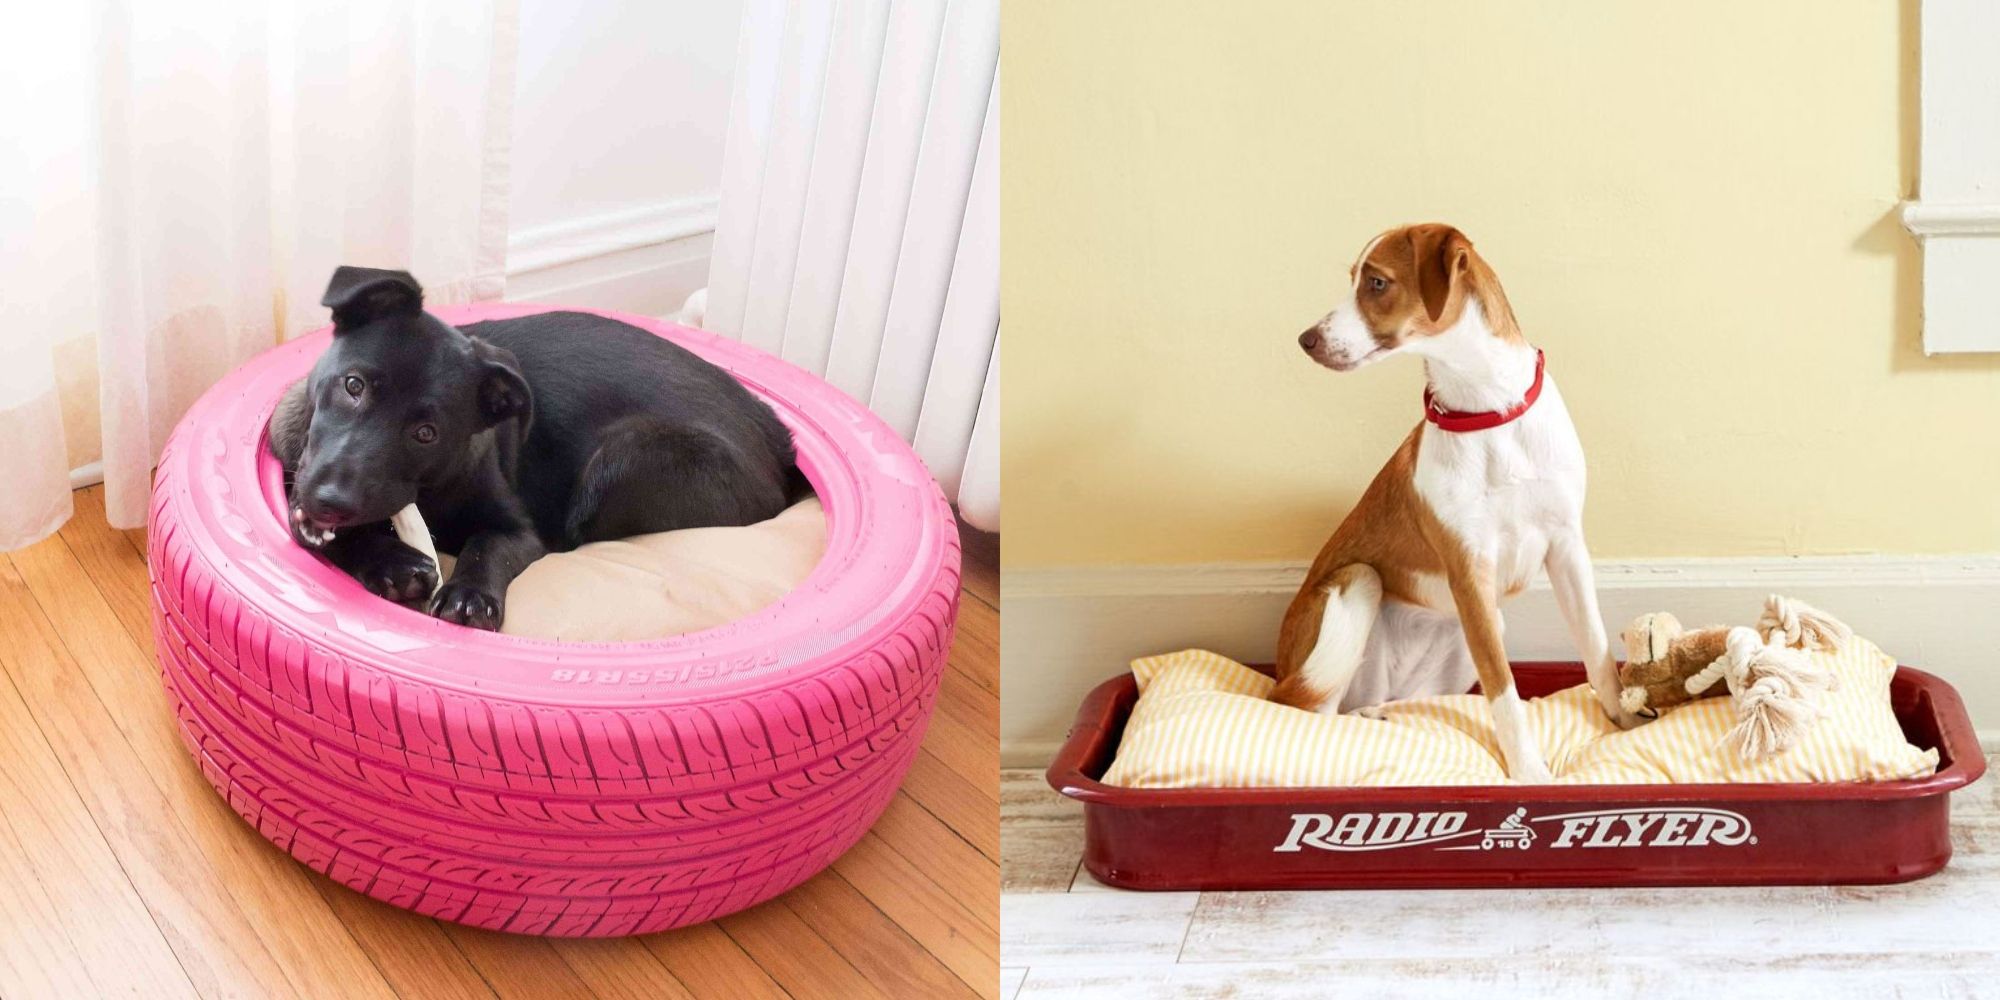 19 Adorable Diy Dog Beds How To Make, King Size Bed With Dog Insert